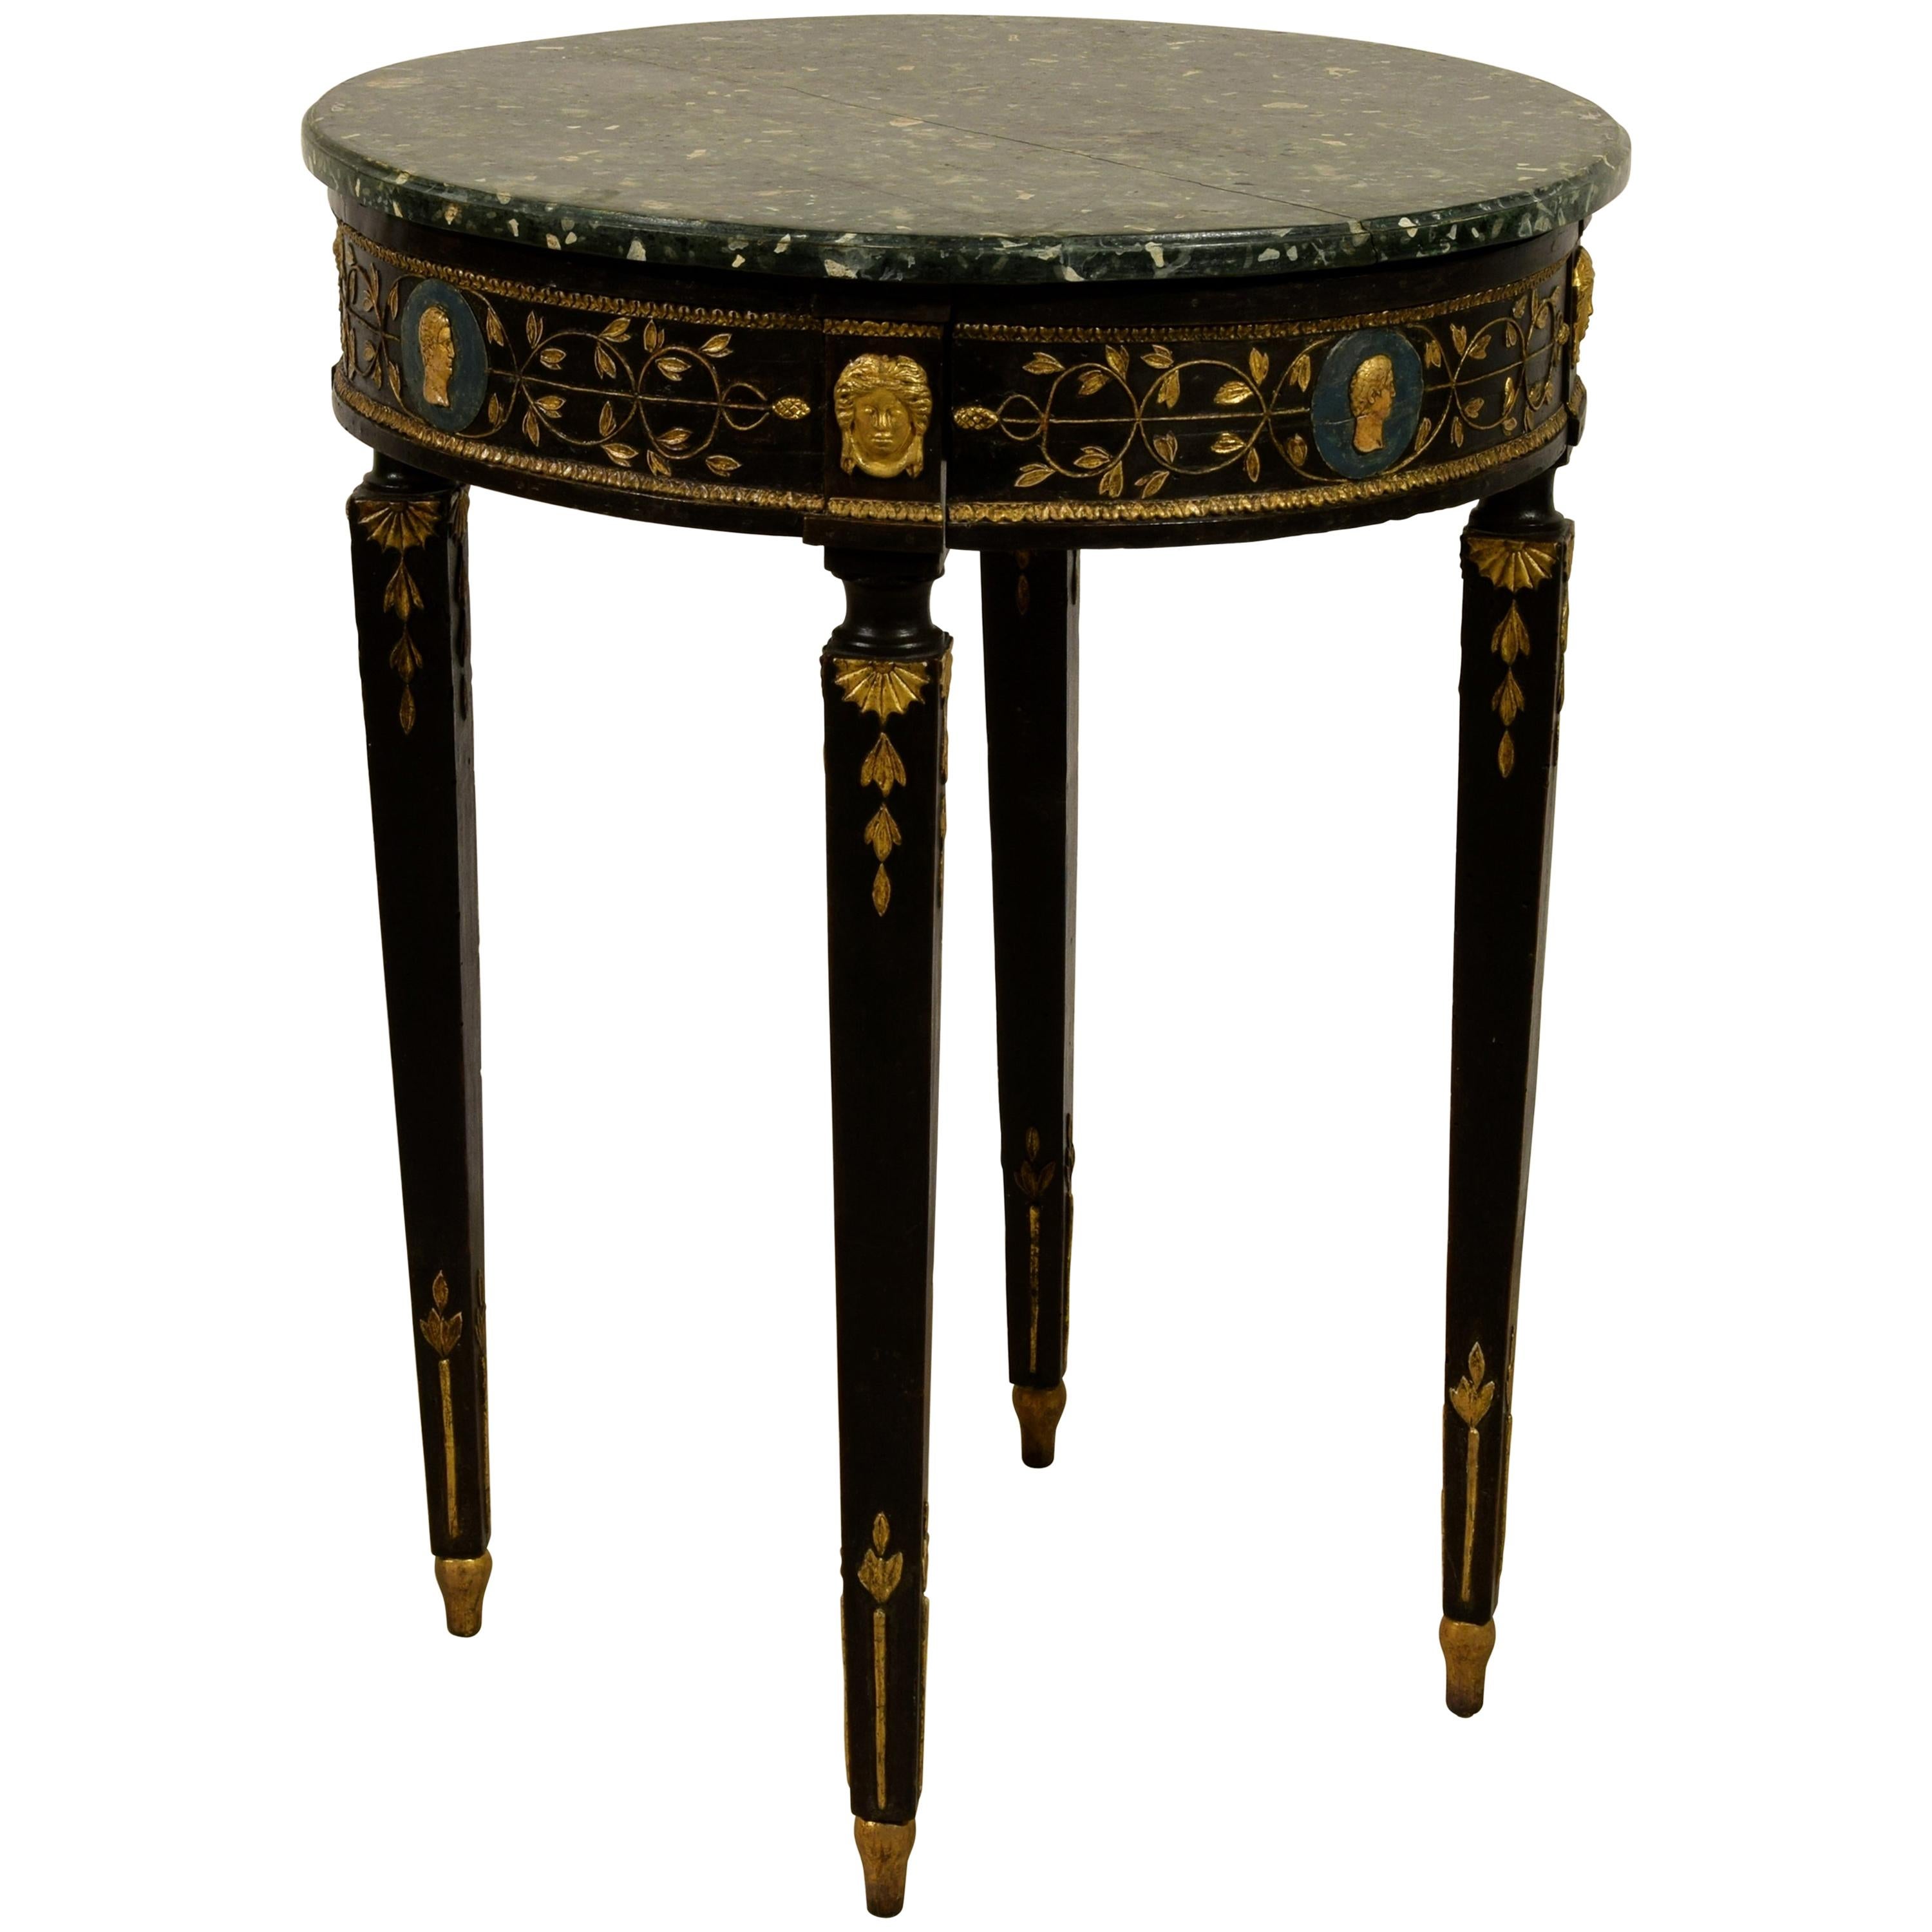 18th Century, Italian Neoclassical Carved and Lacquered Wood Coffee Table